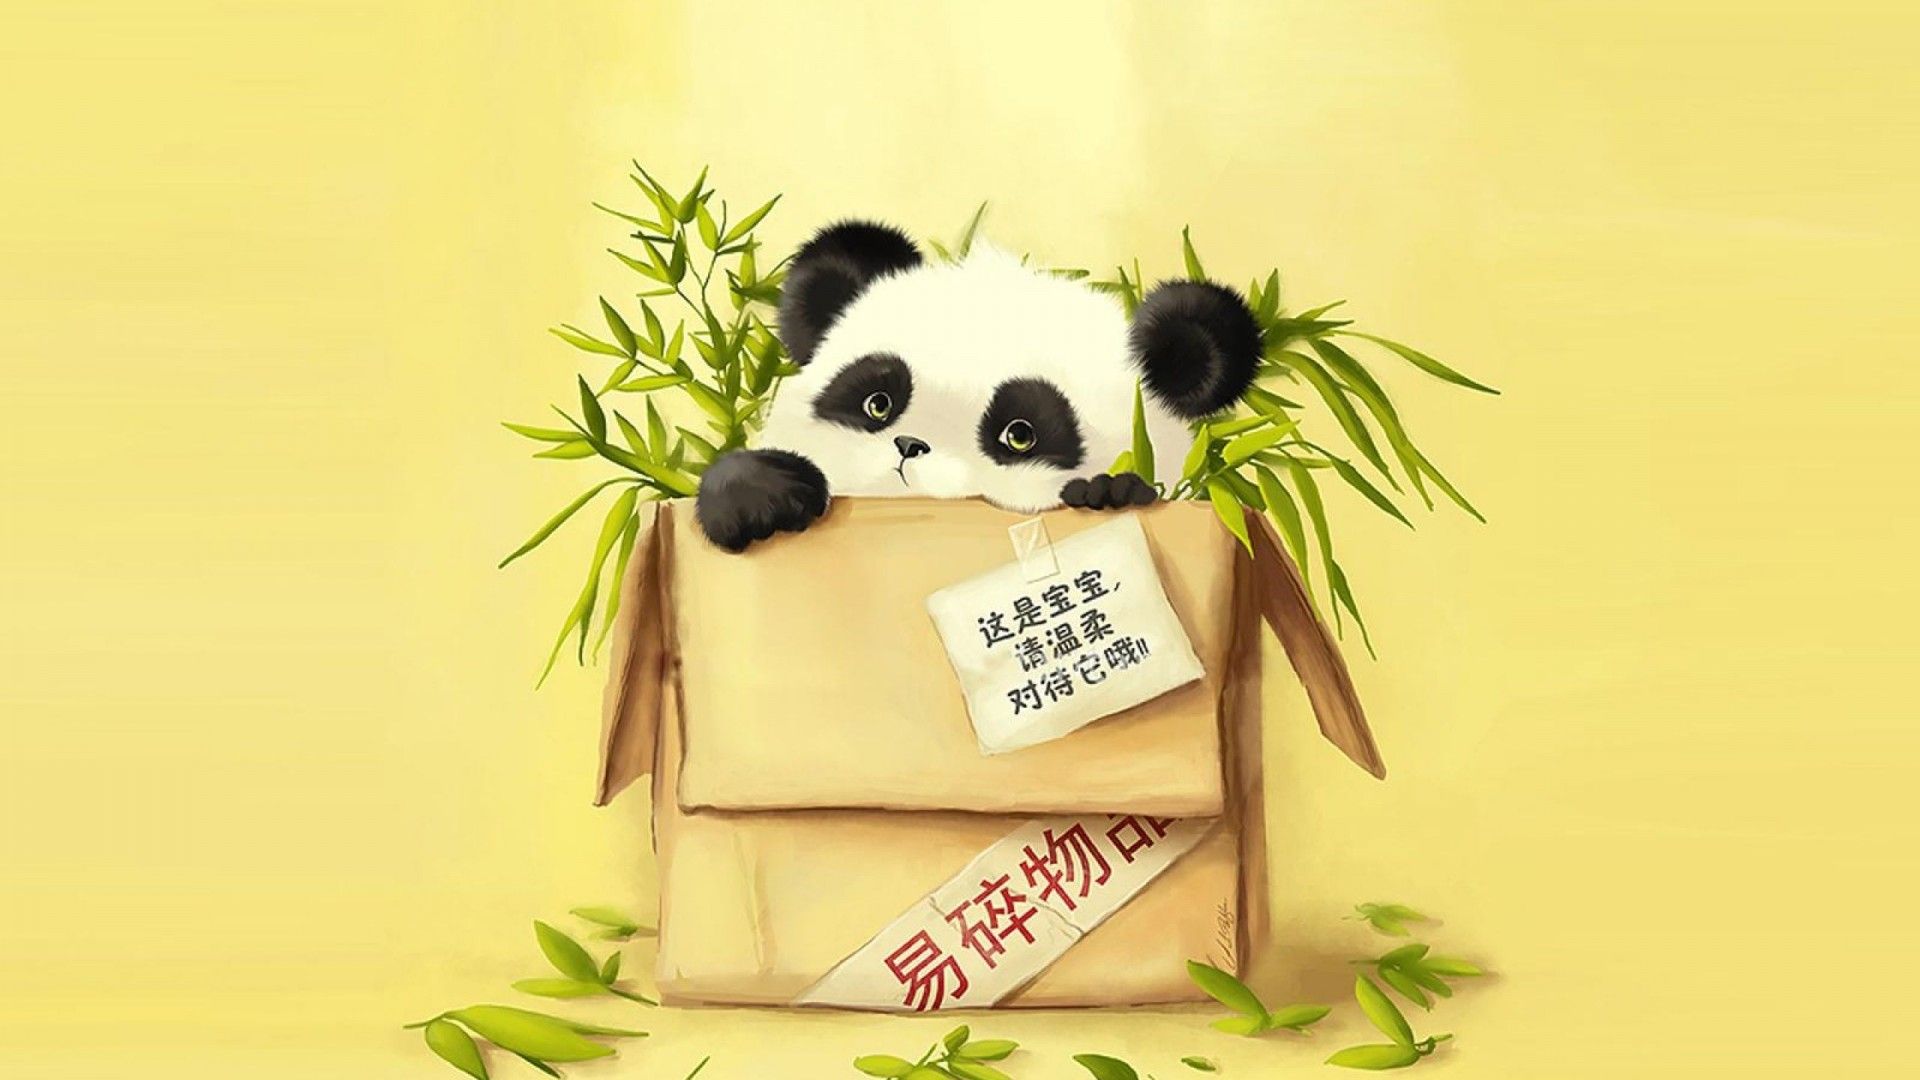 A panda in a box with a sign that says 'this is a gift' - Panda